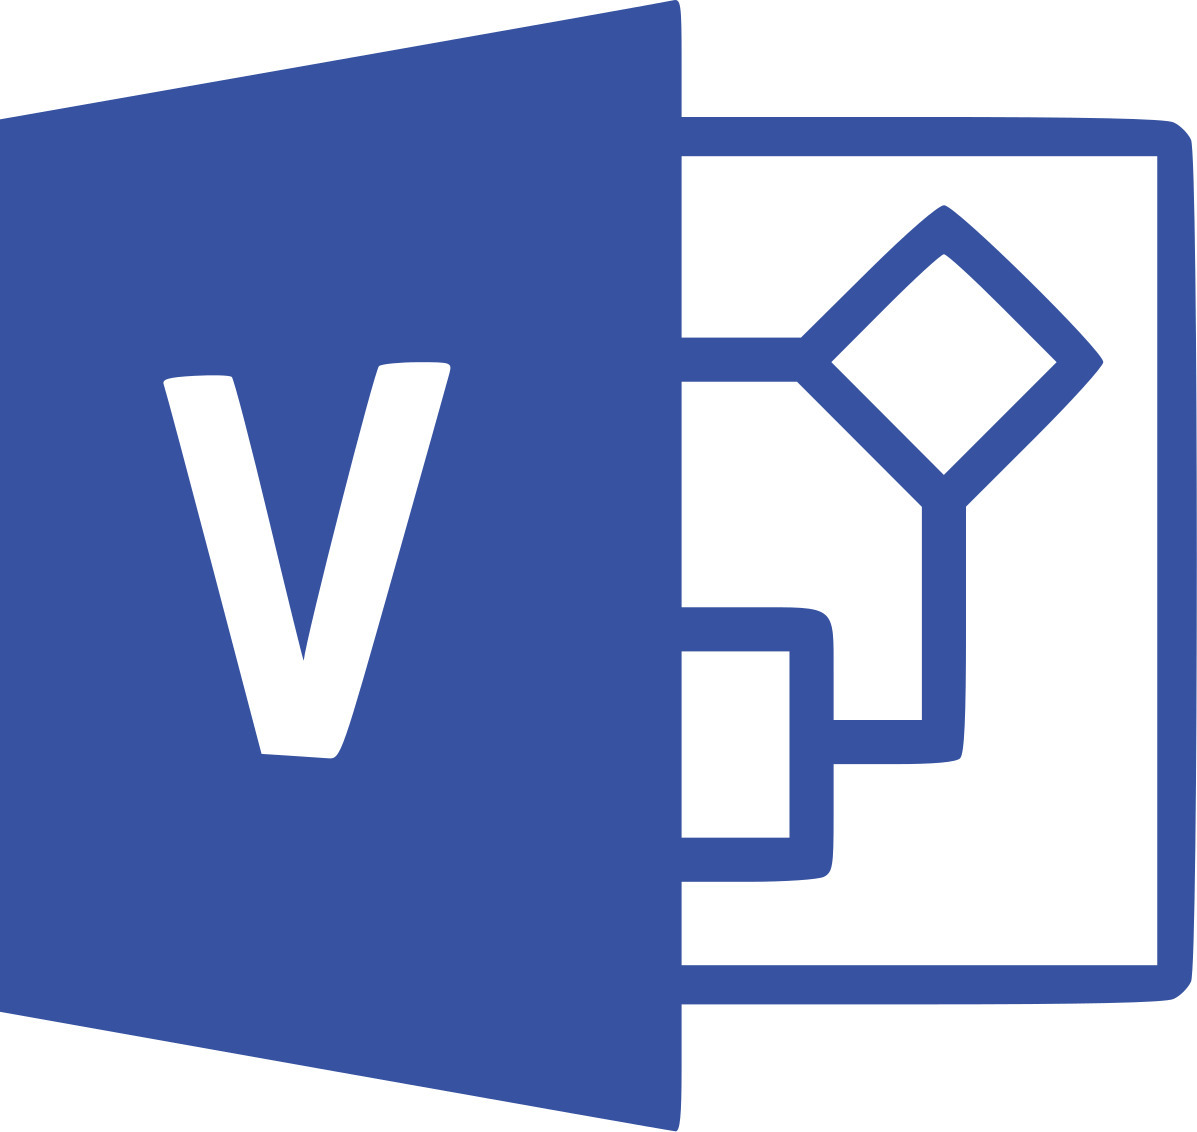 office 2016 professional plus and visio 2019